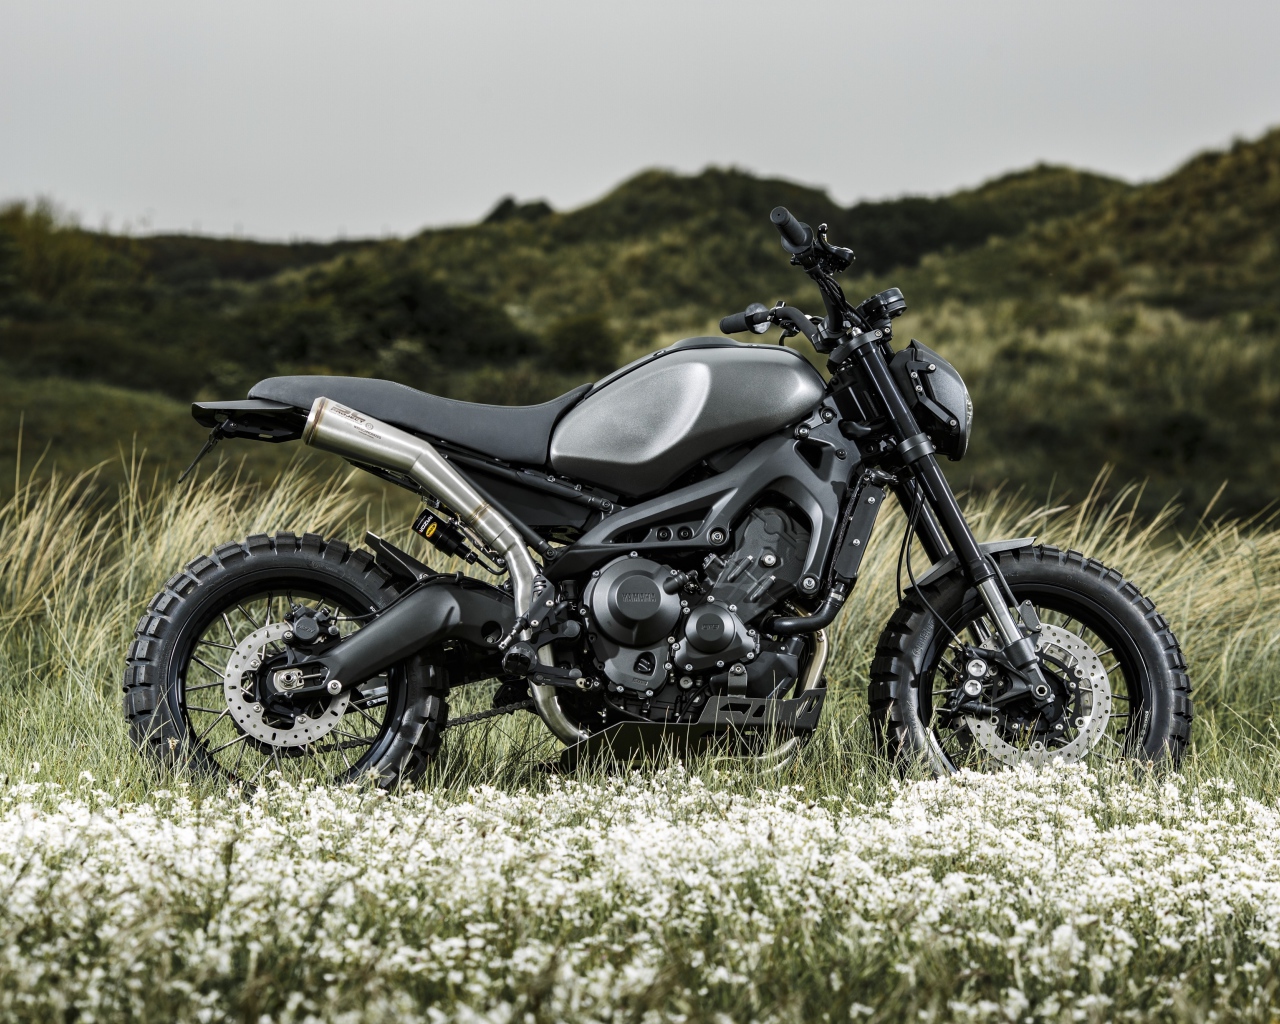 Black Yamaha Tuning XSR900 motorcycle in the field